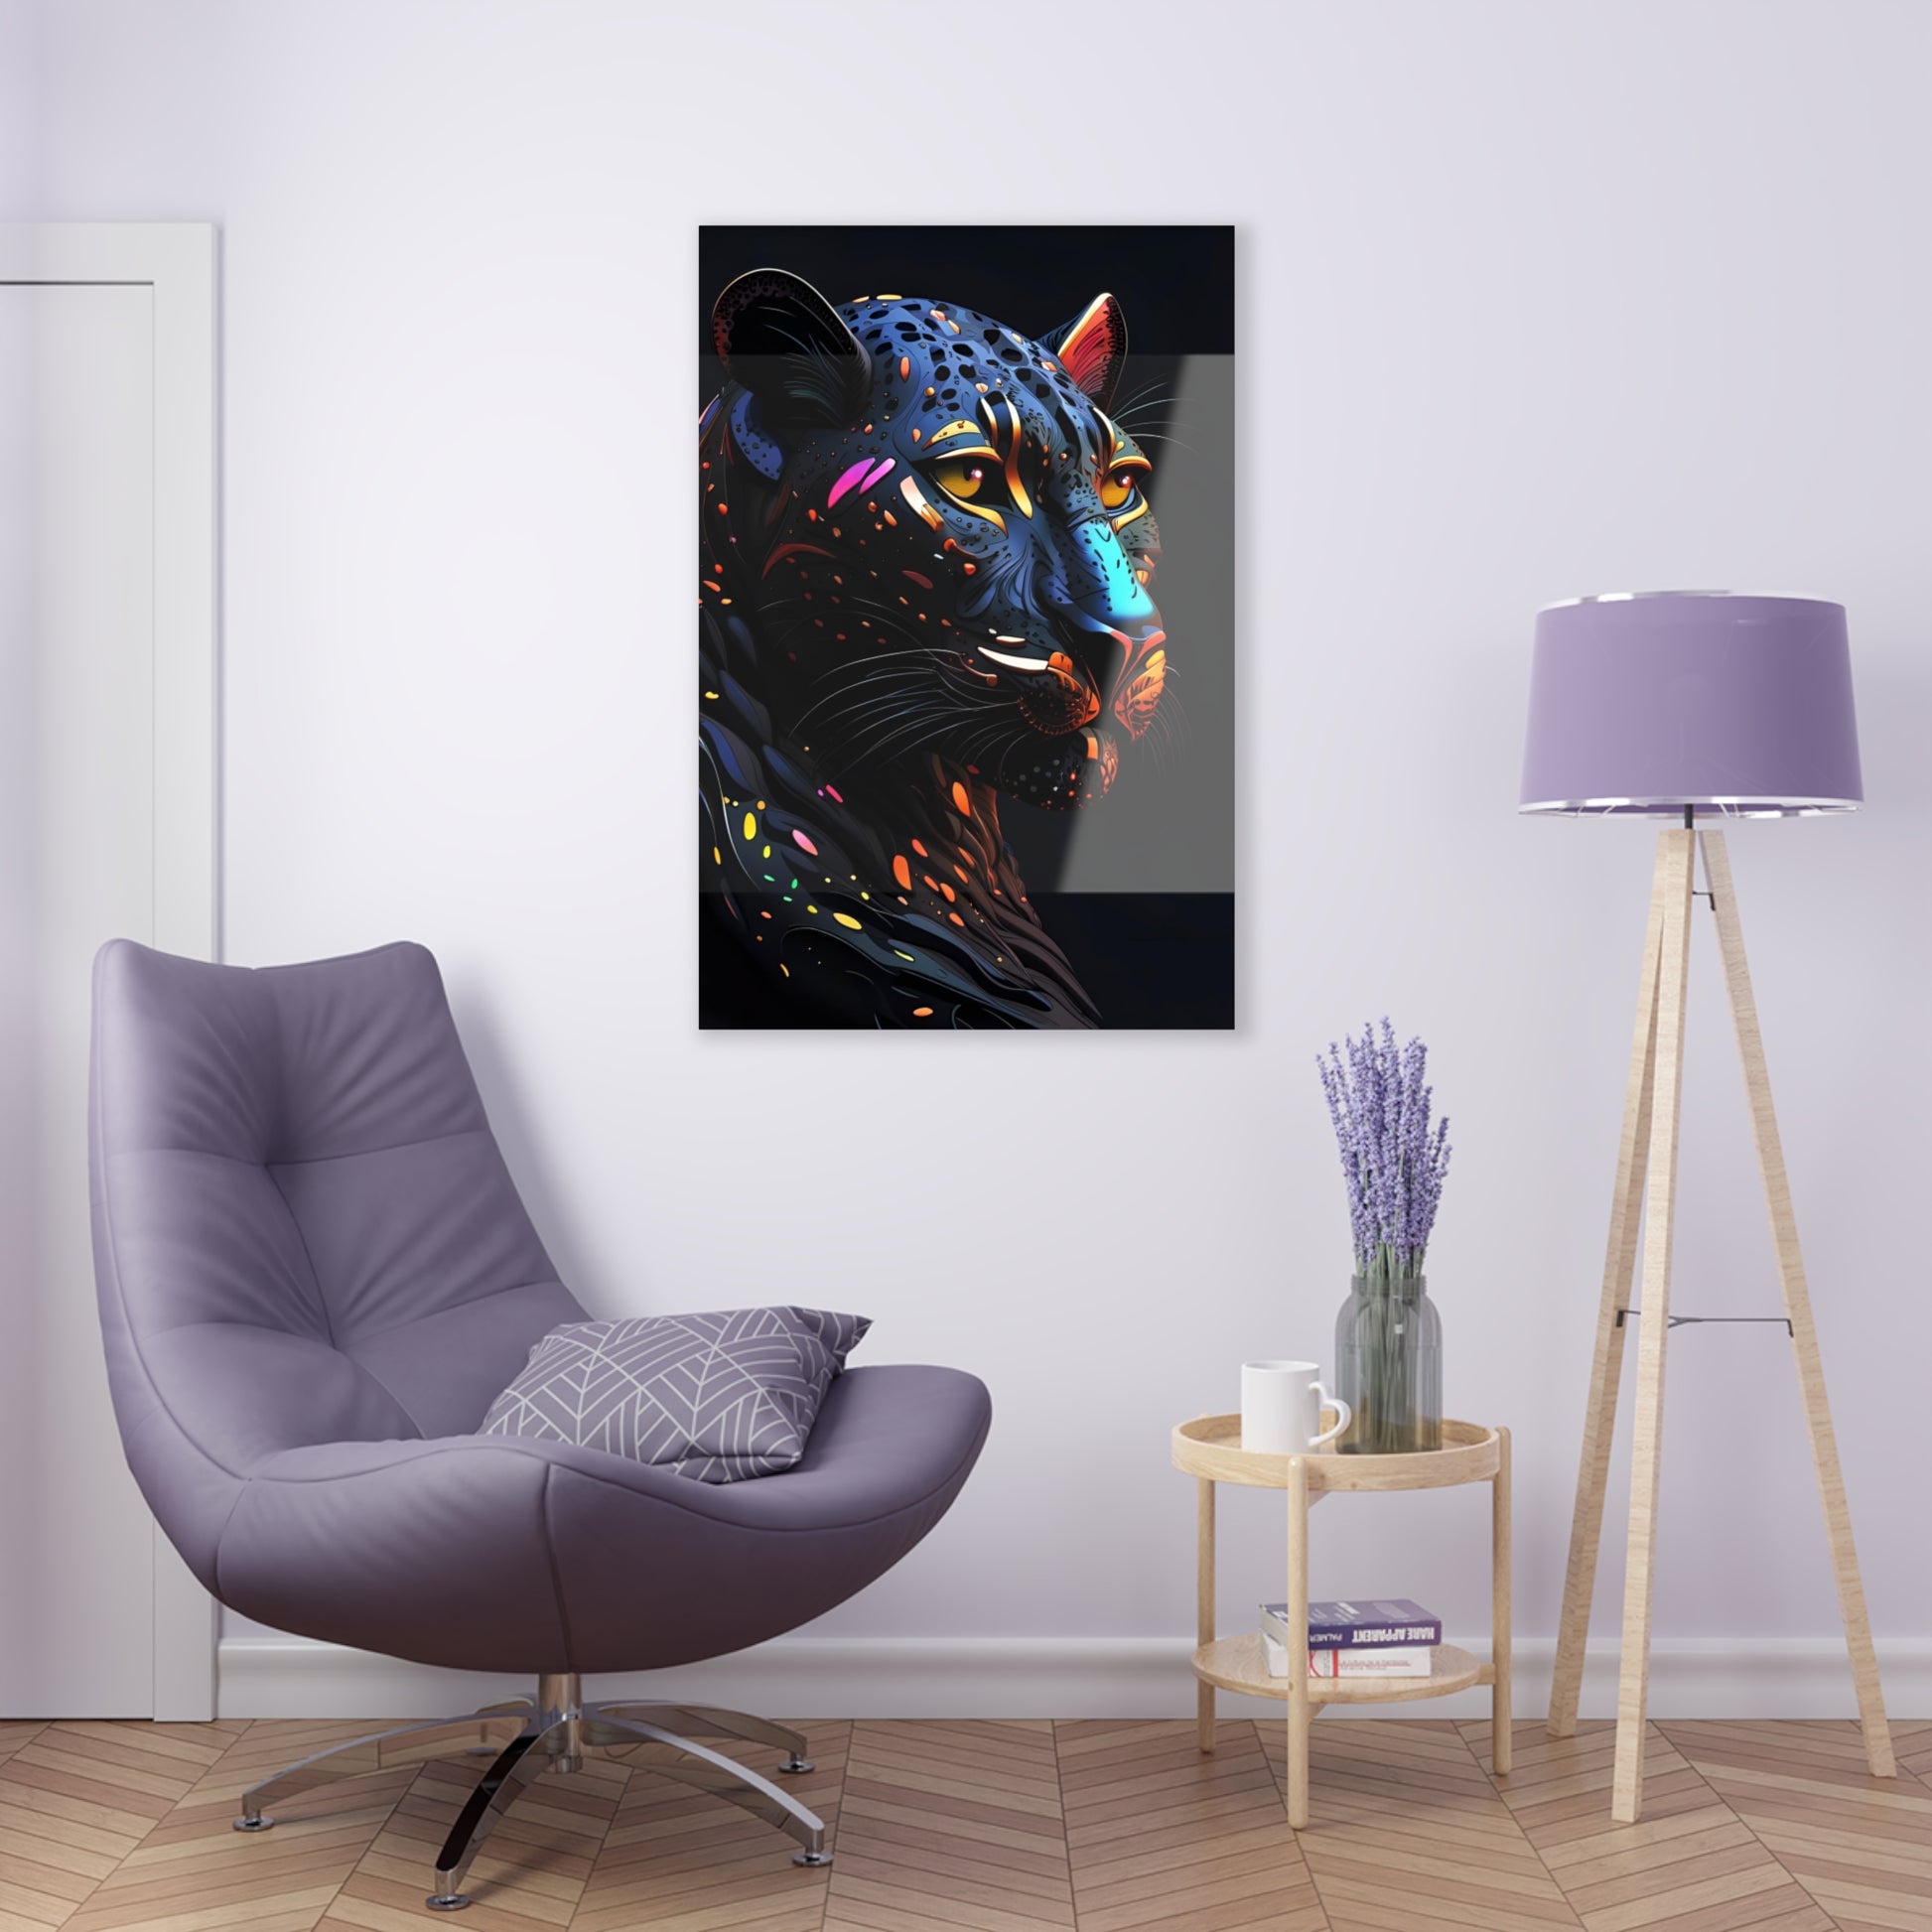 Stylized Colorful Black Panther Head printed on a crystal clear acrylic panel 24x36 hung on white wall